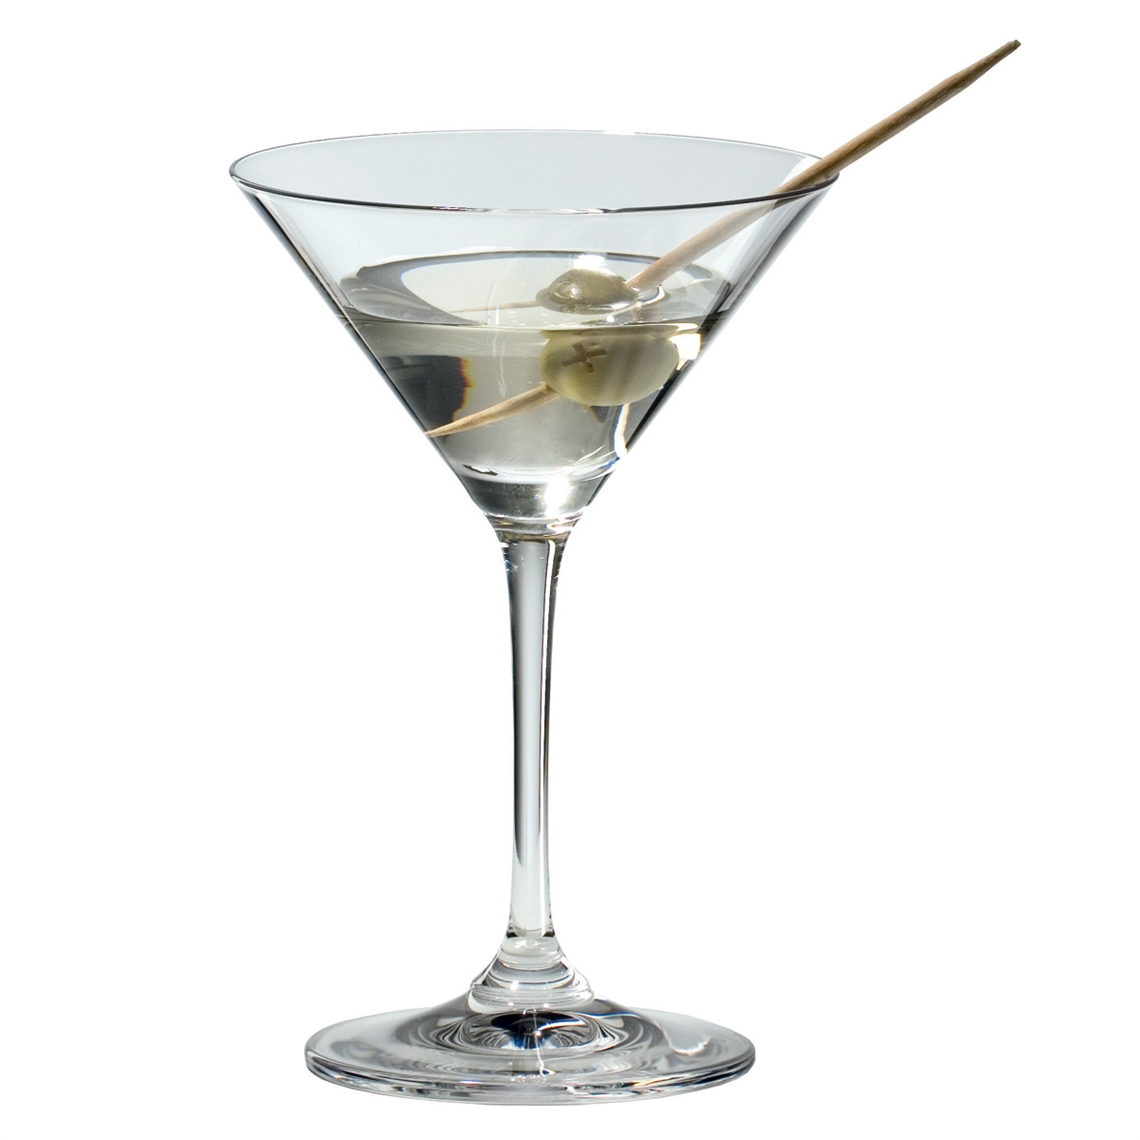 View more riedel extreme from our Martini Glasses range